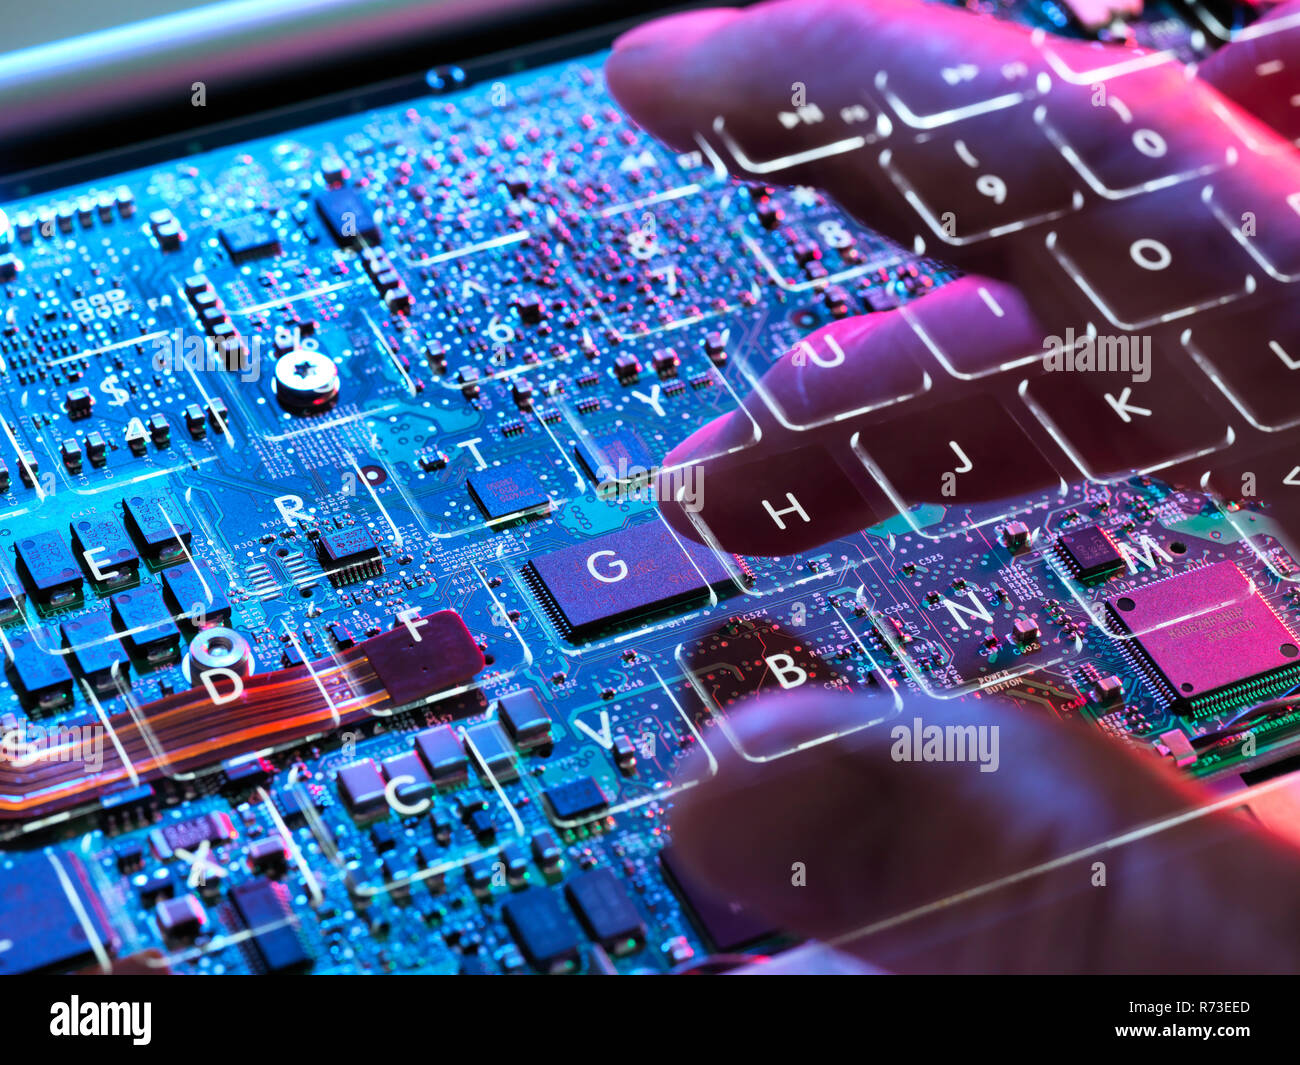 Multiple exposure of a laptop computer showing  a invisible computer hacker working at a keyboard and circuit board below Stock Photo